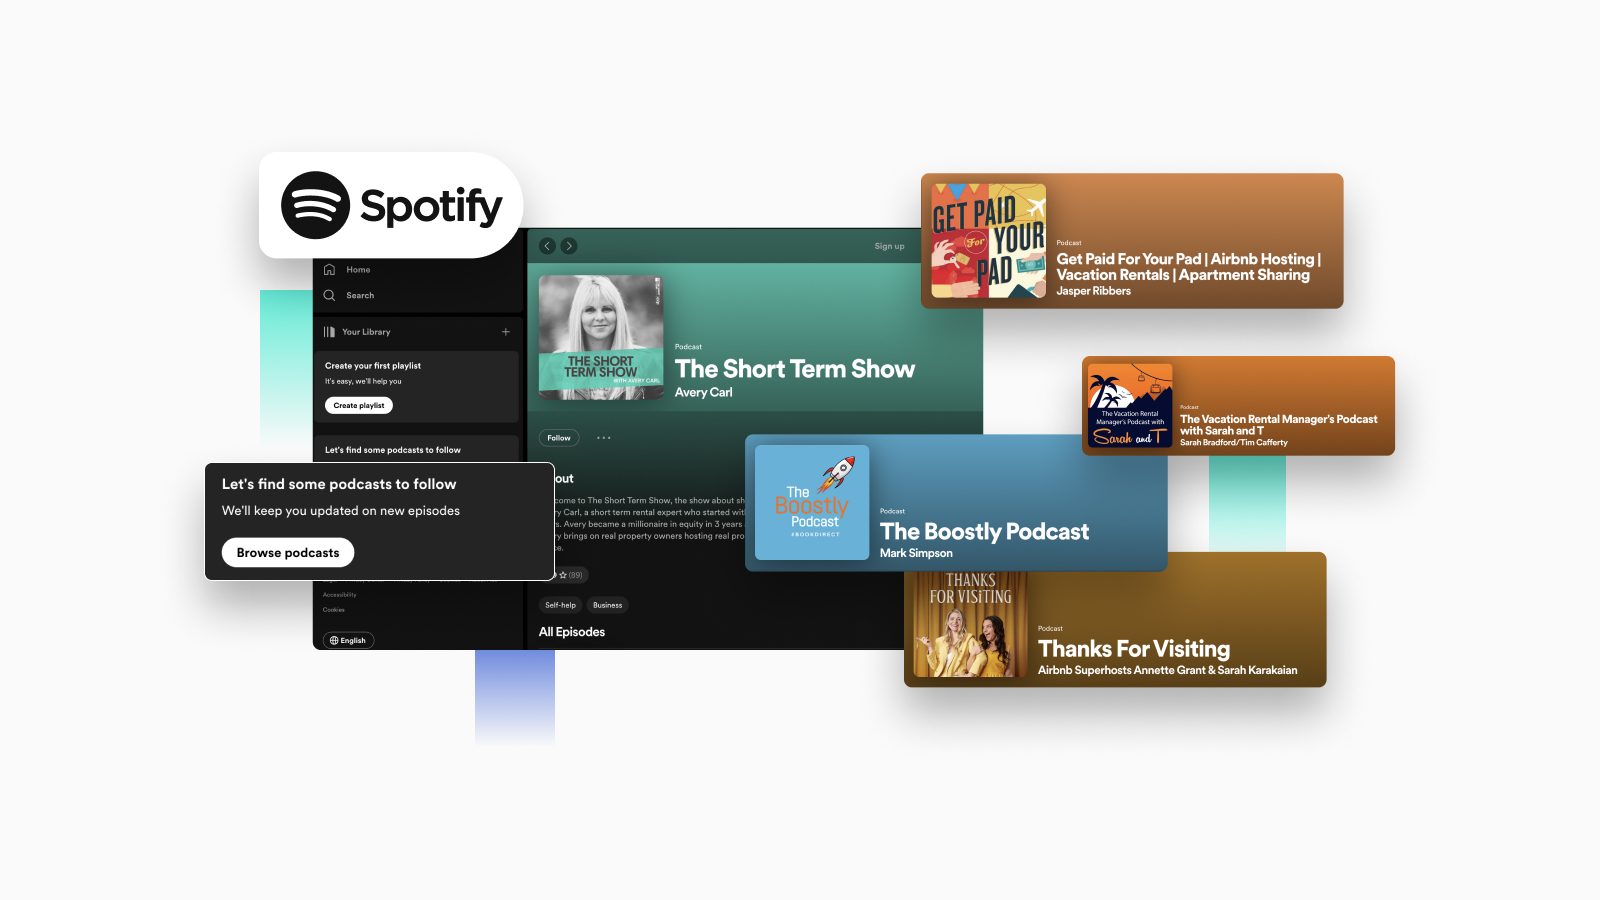 The featured image of the best short term rental podcasts on Spotify.